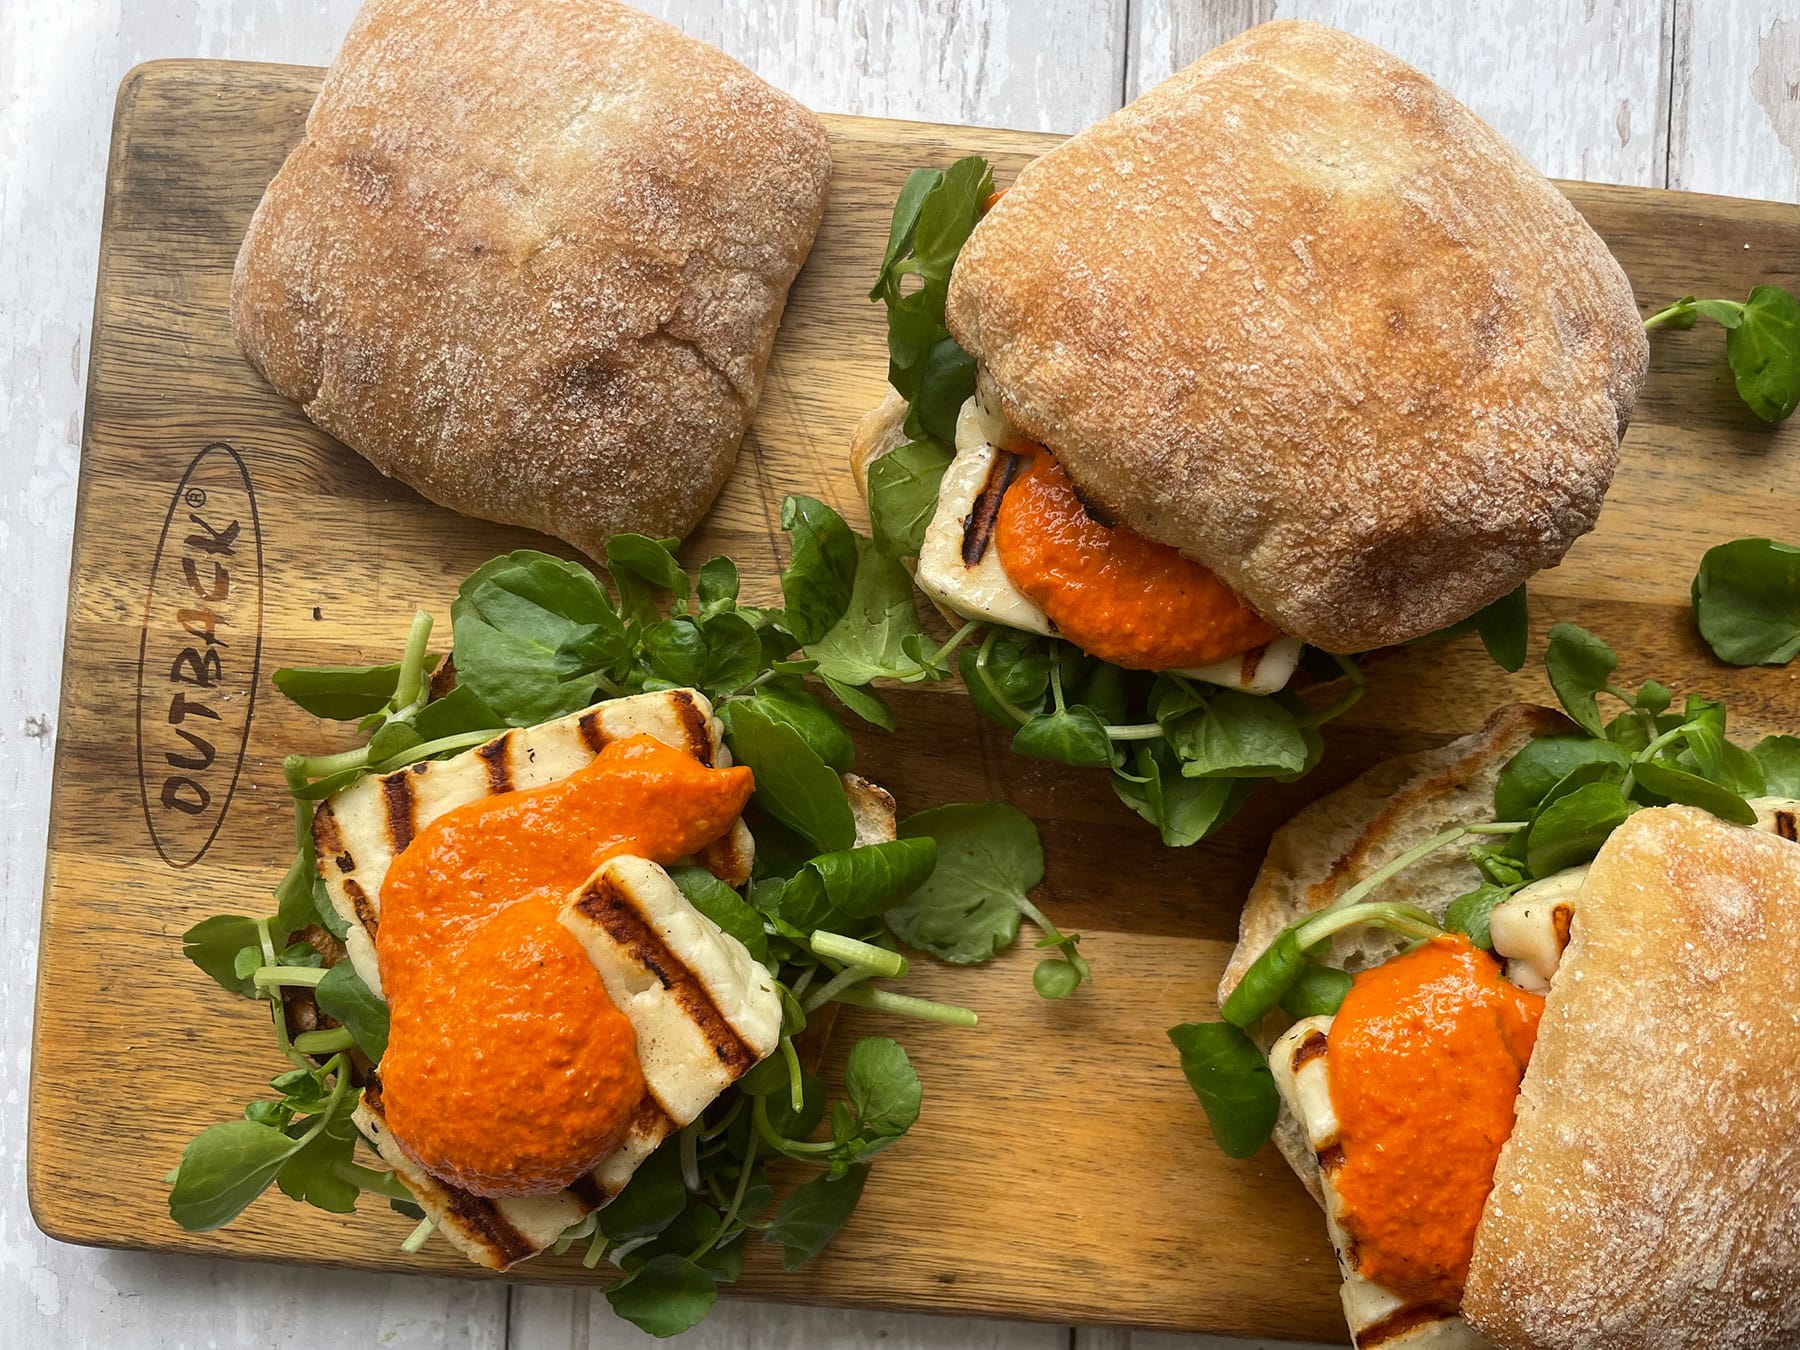 Grilled Halloumi Sandwiches with Romesco Sauce